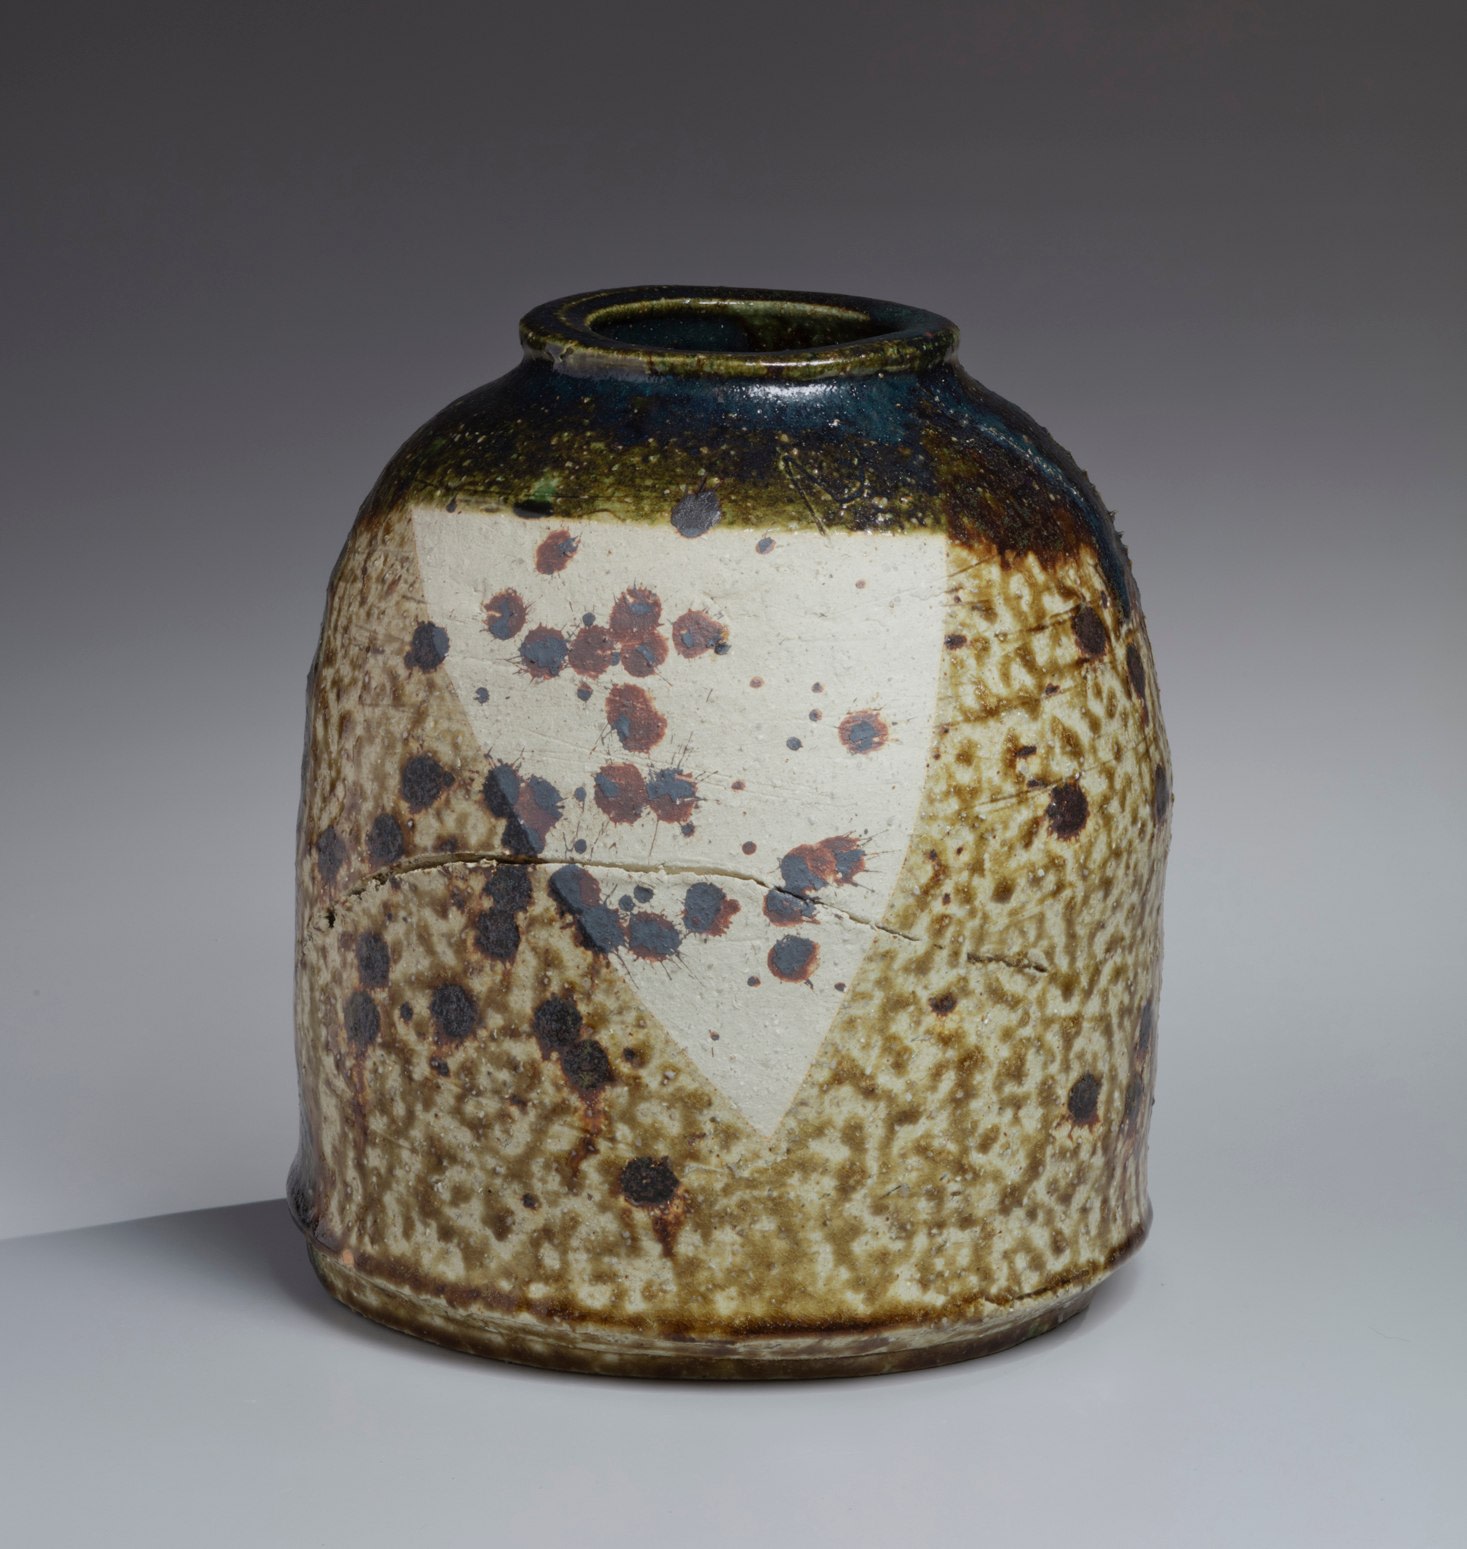 Dark brown, oribe-glazed tsubo (vessel) with splash patterning in iron-oxide and incised abstract patterning, 1991